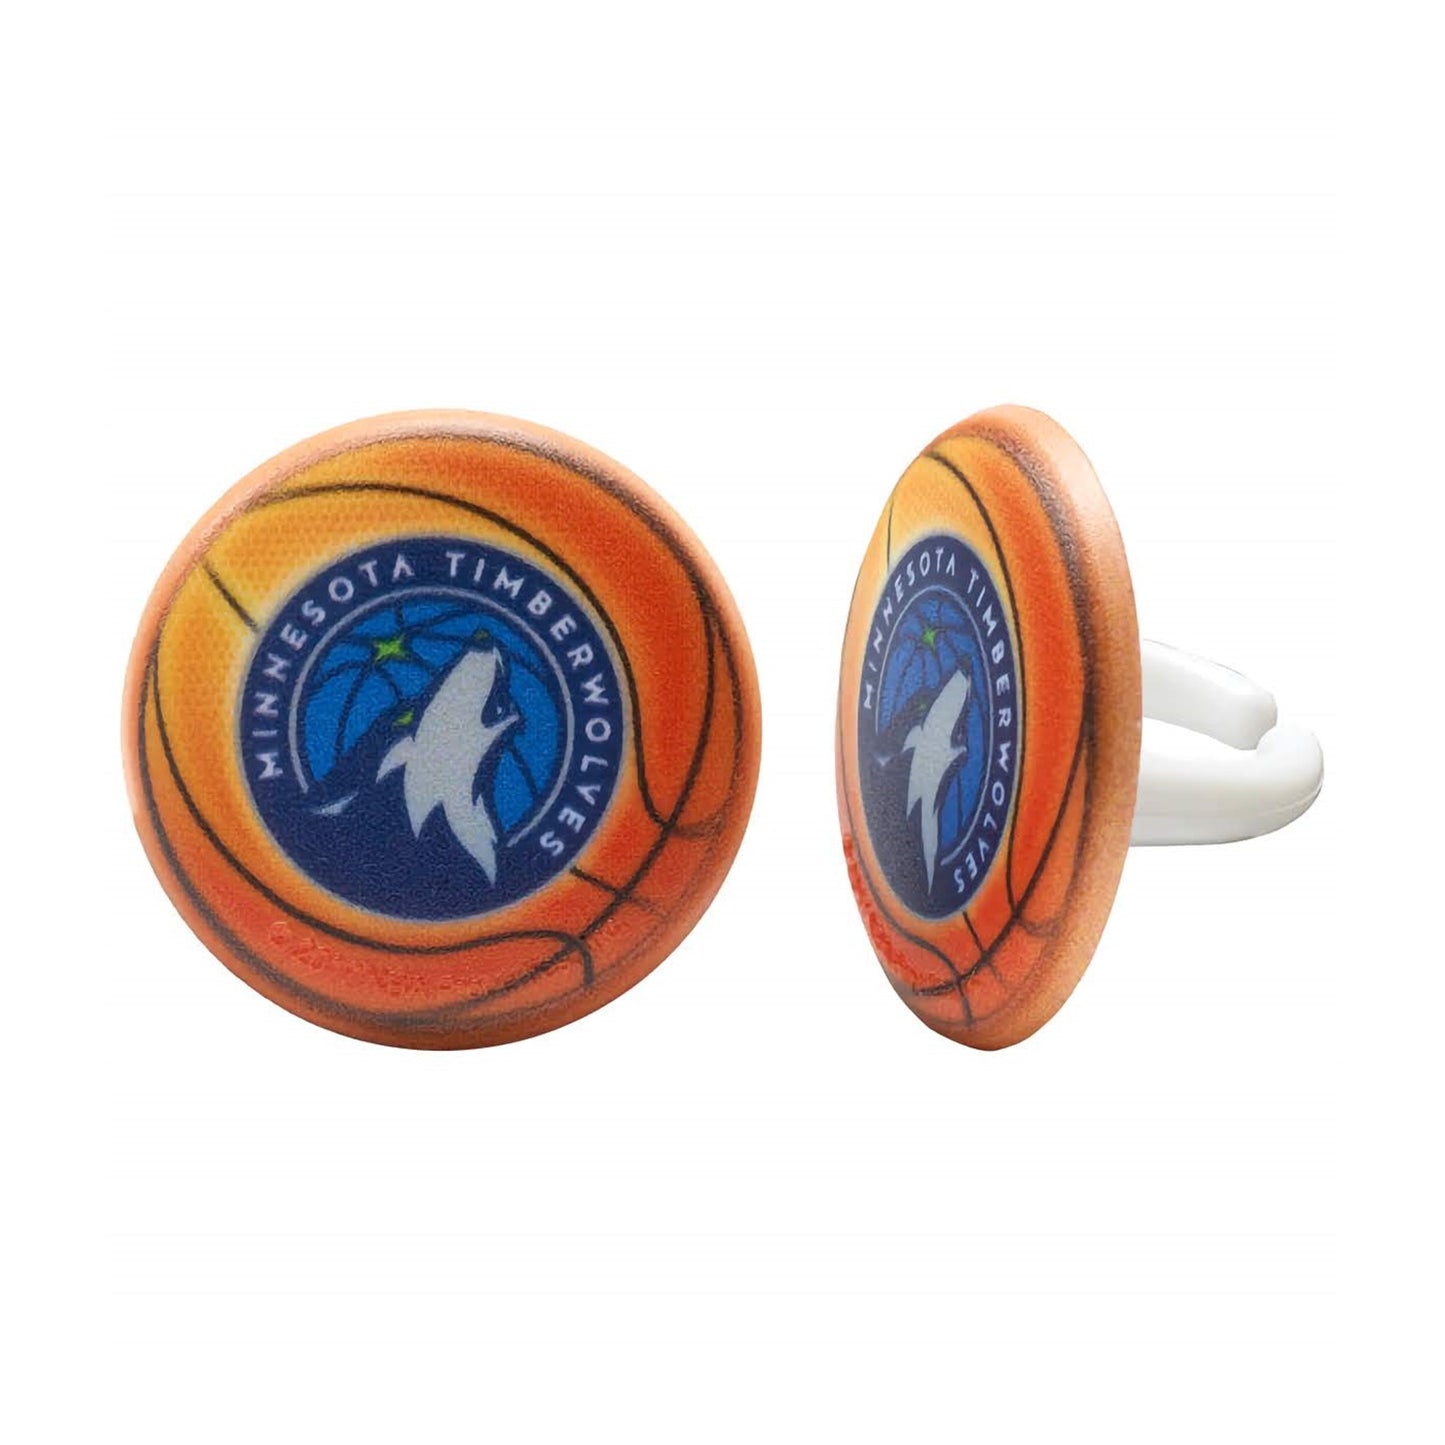 Pack of six NBA Minnesota Timberwolves cupcake rings, featuring the team's logo on a basketball background, ideal for fan celebrations, game nights, and themed parties.